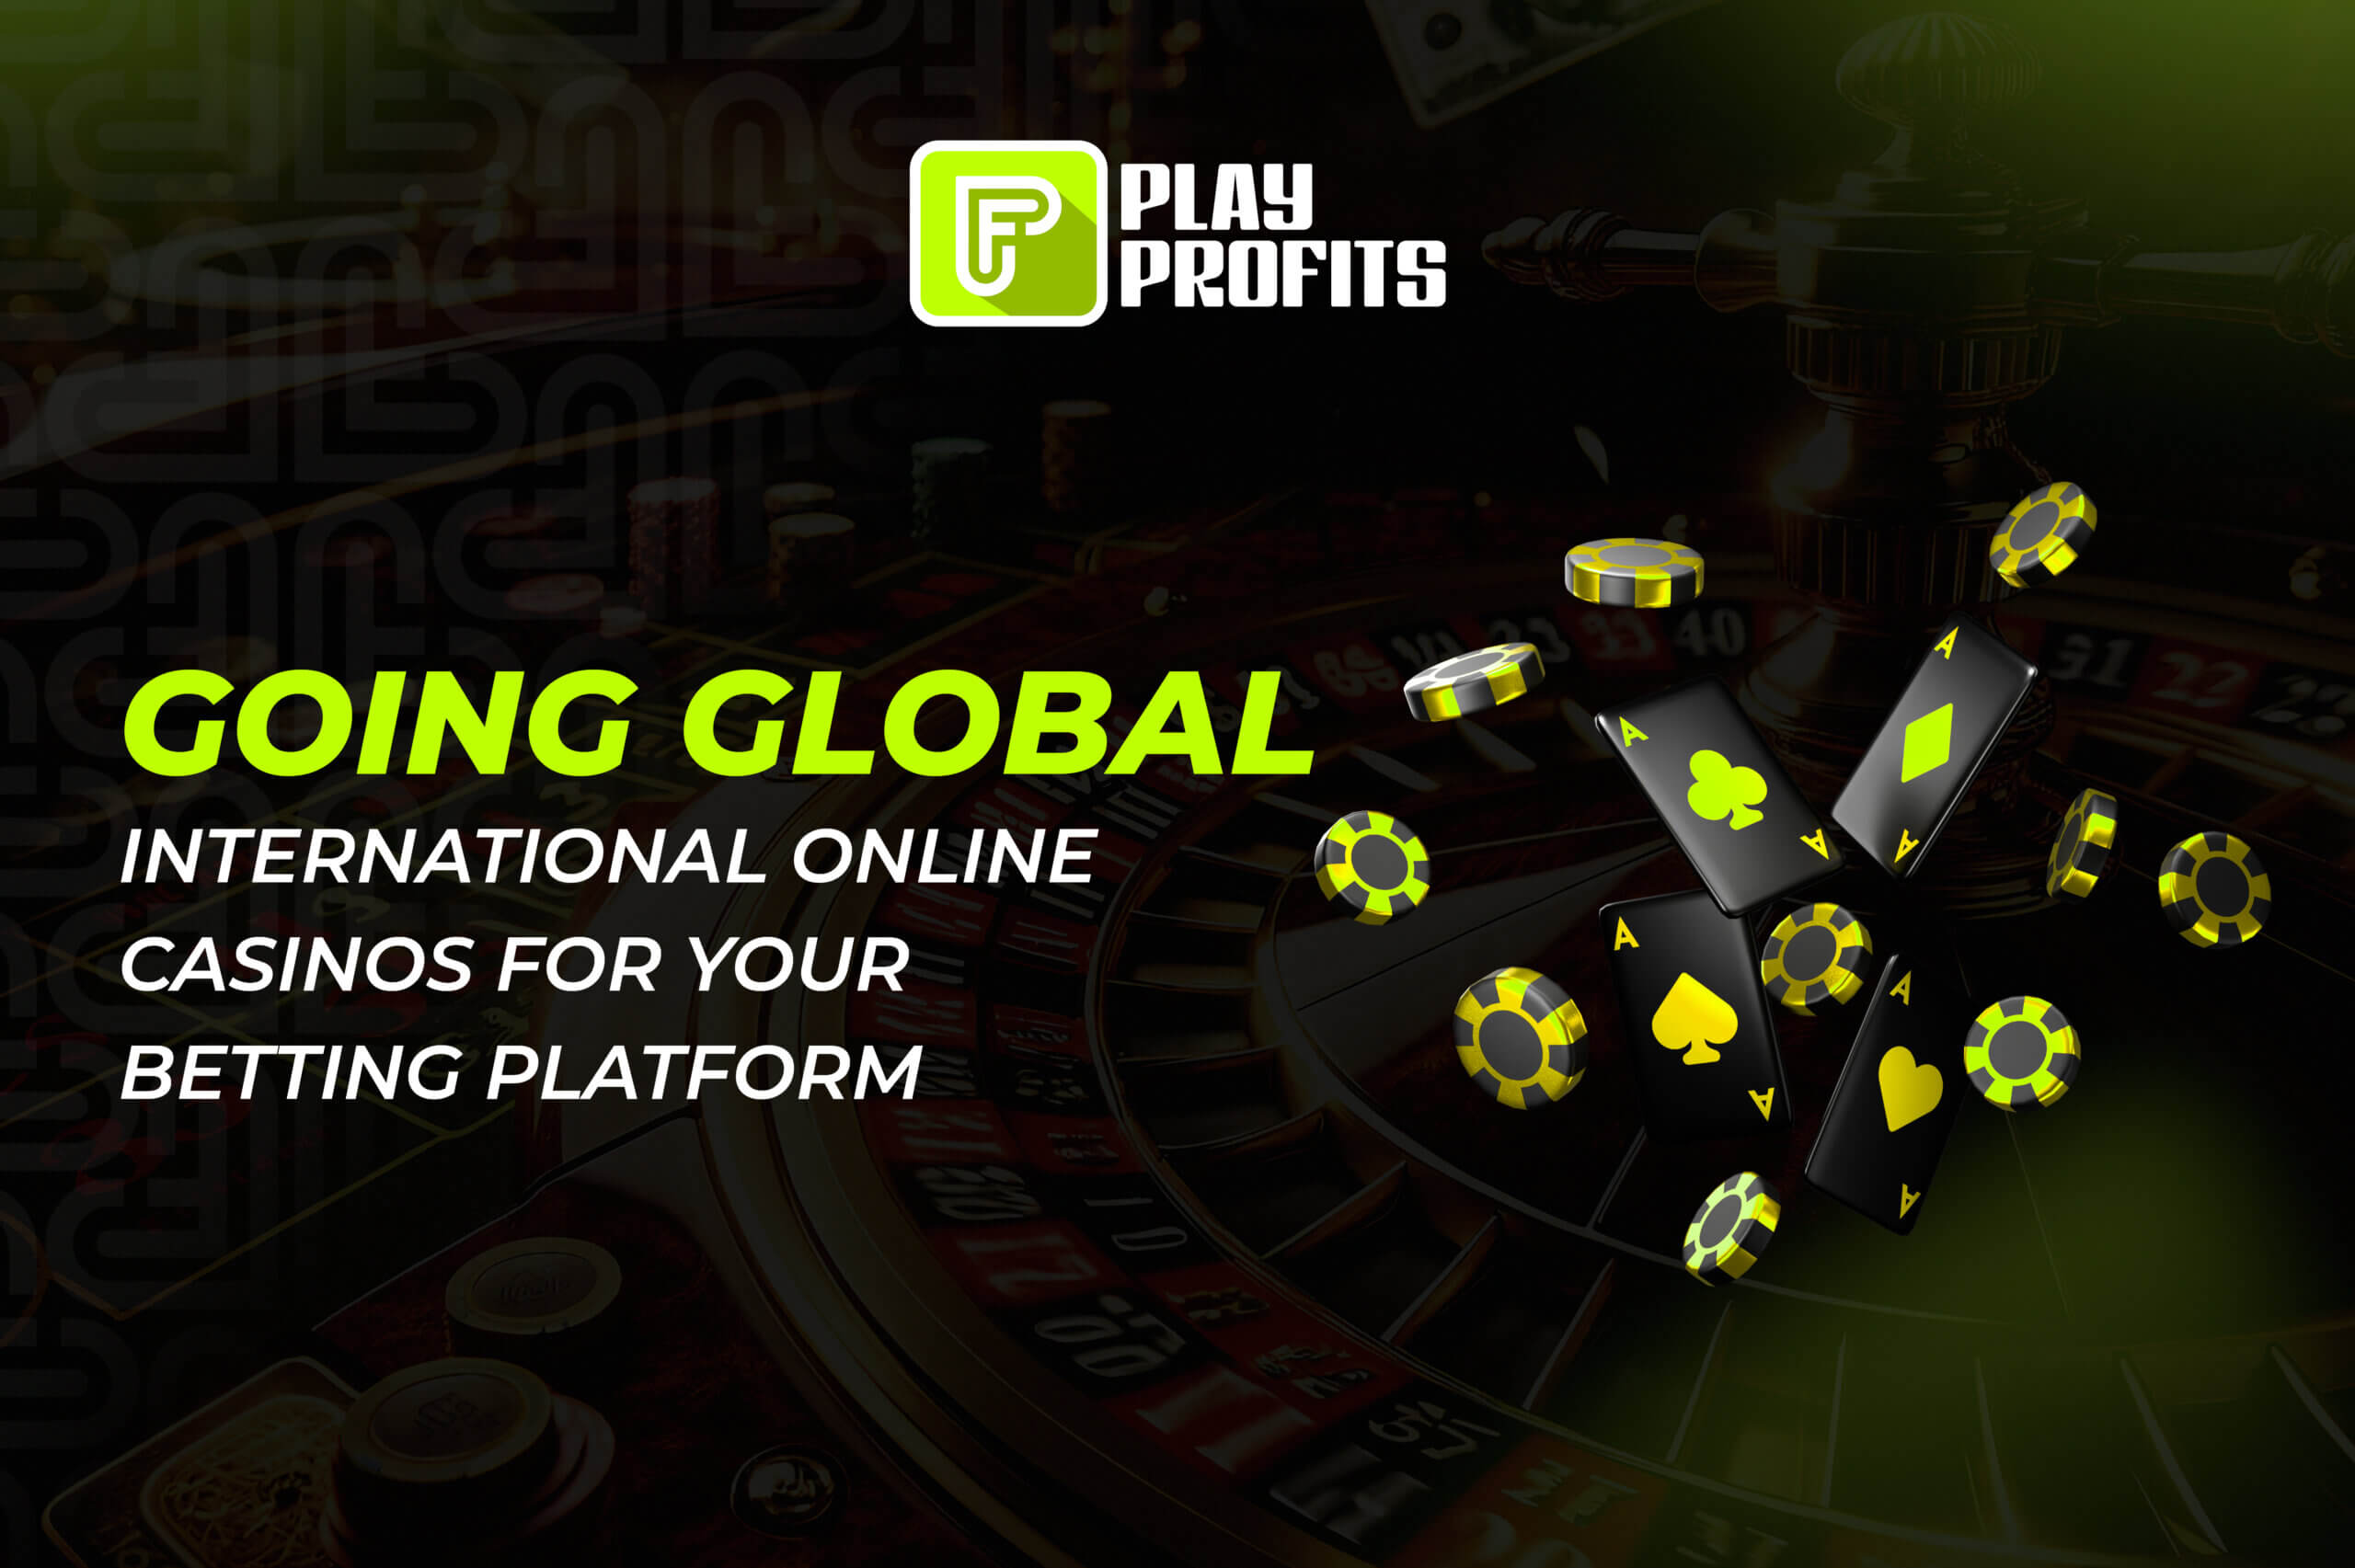 Going Global: International online Casinos for your Betting Platform - Play Profits